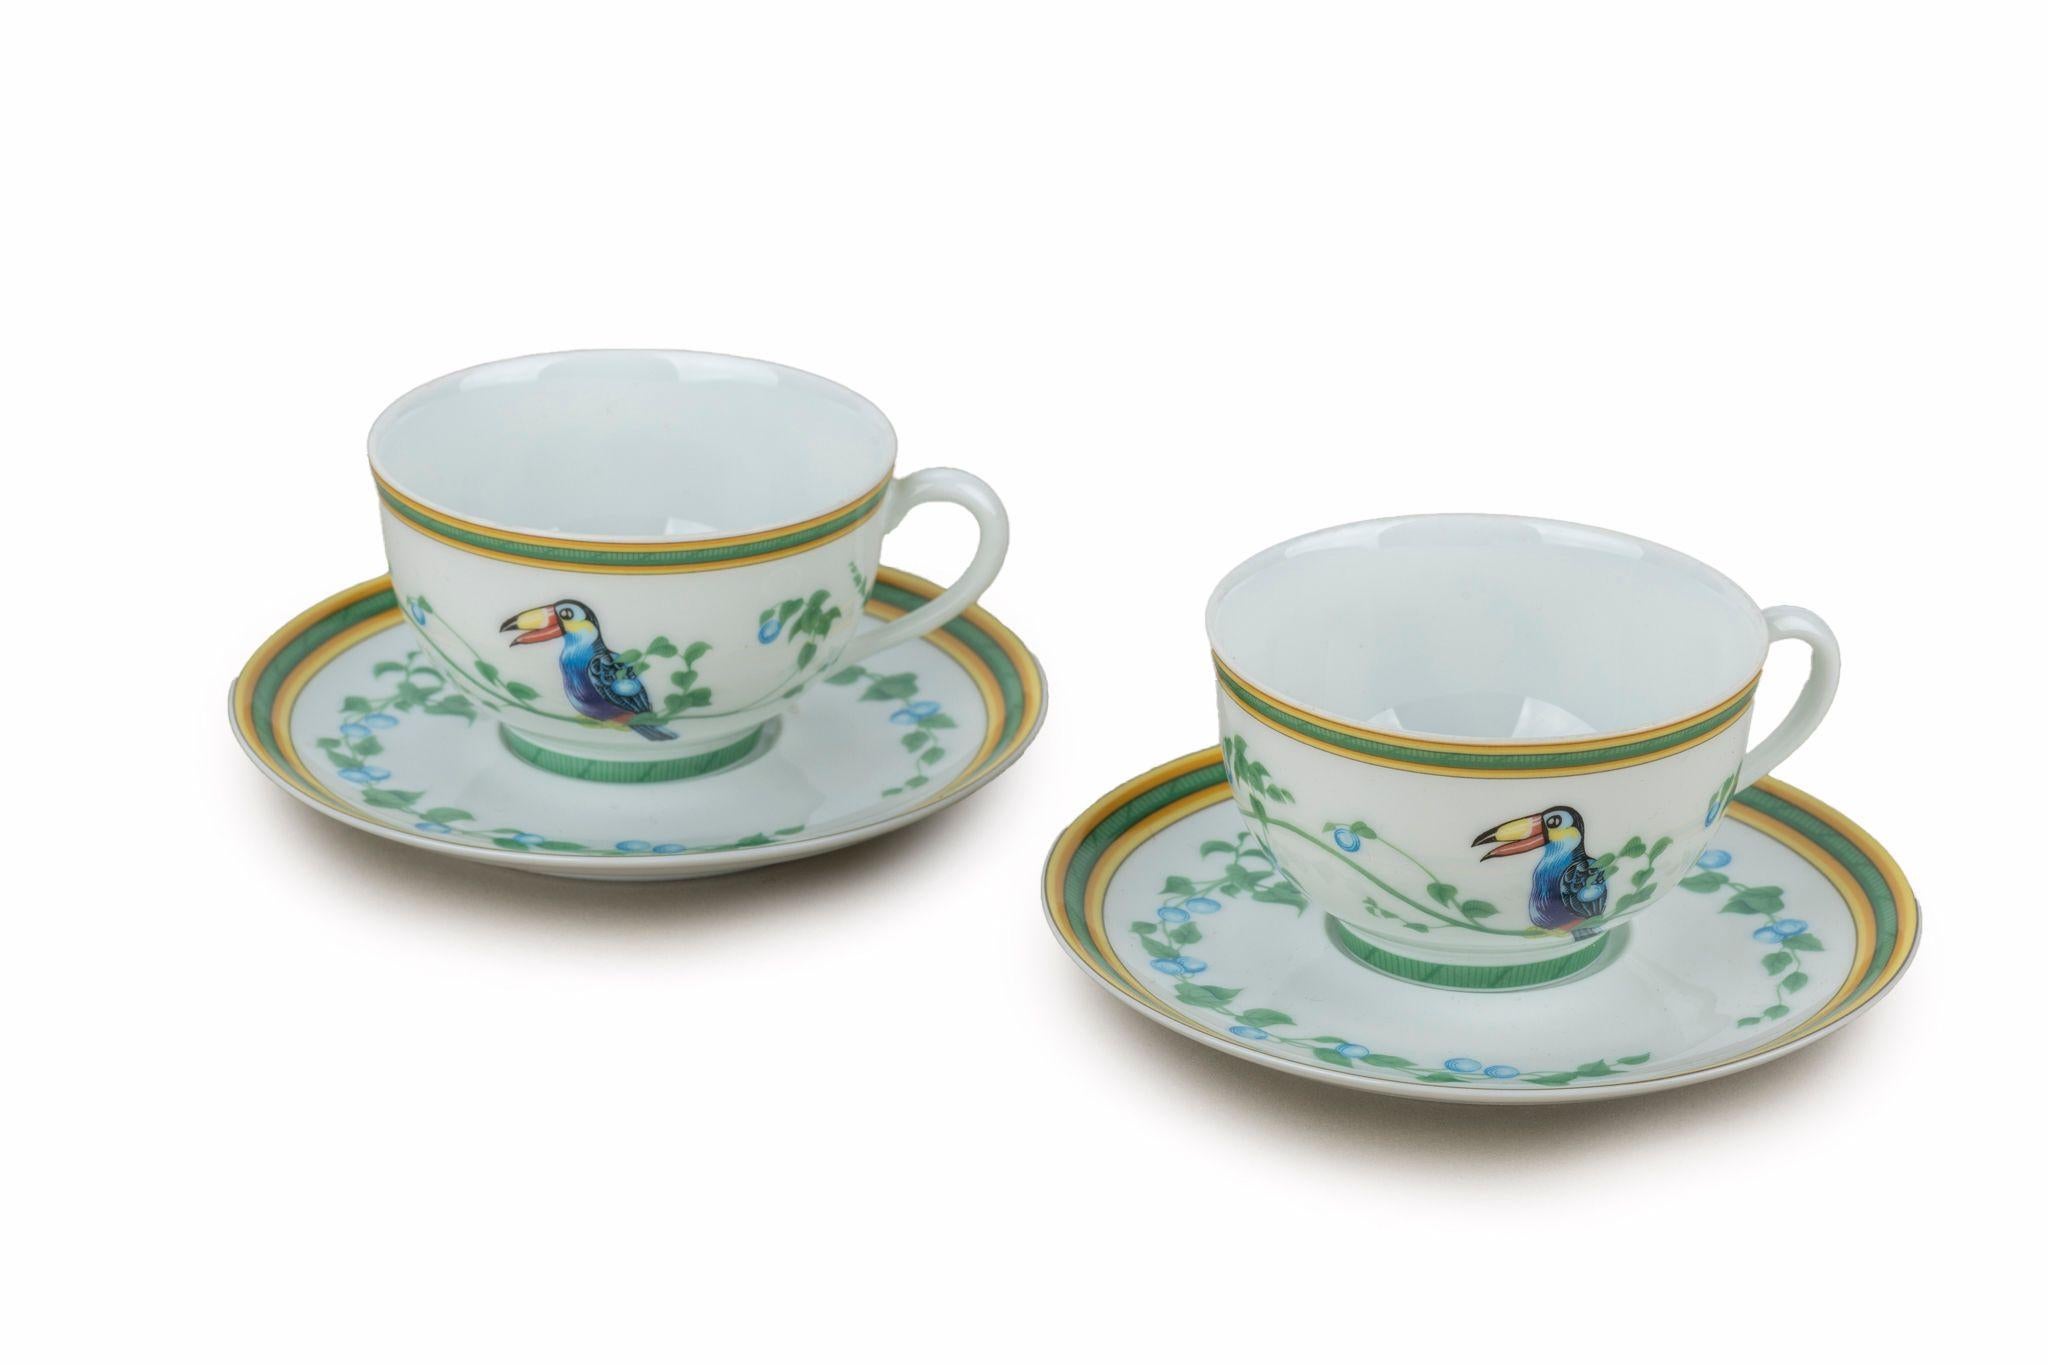 Set of two Hermès teacups and saucers with an toucans design in porcelain.
Come with original box.